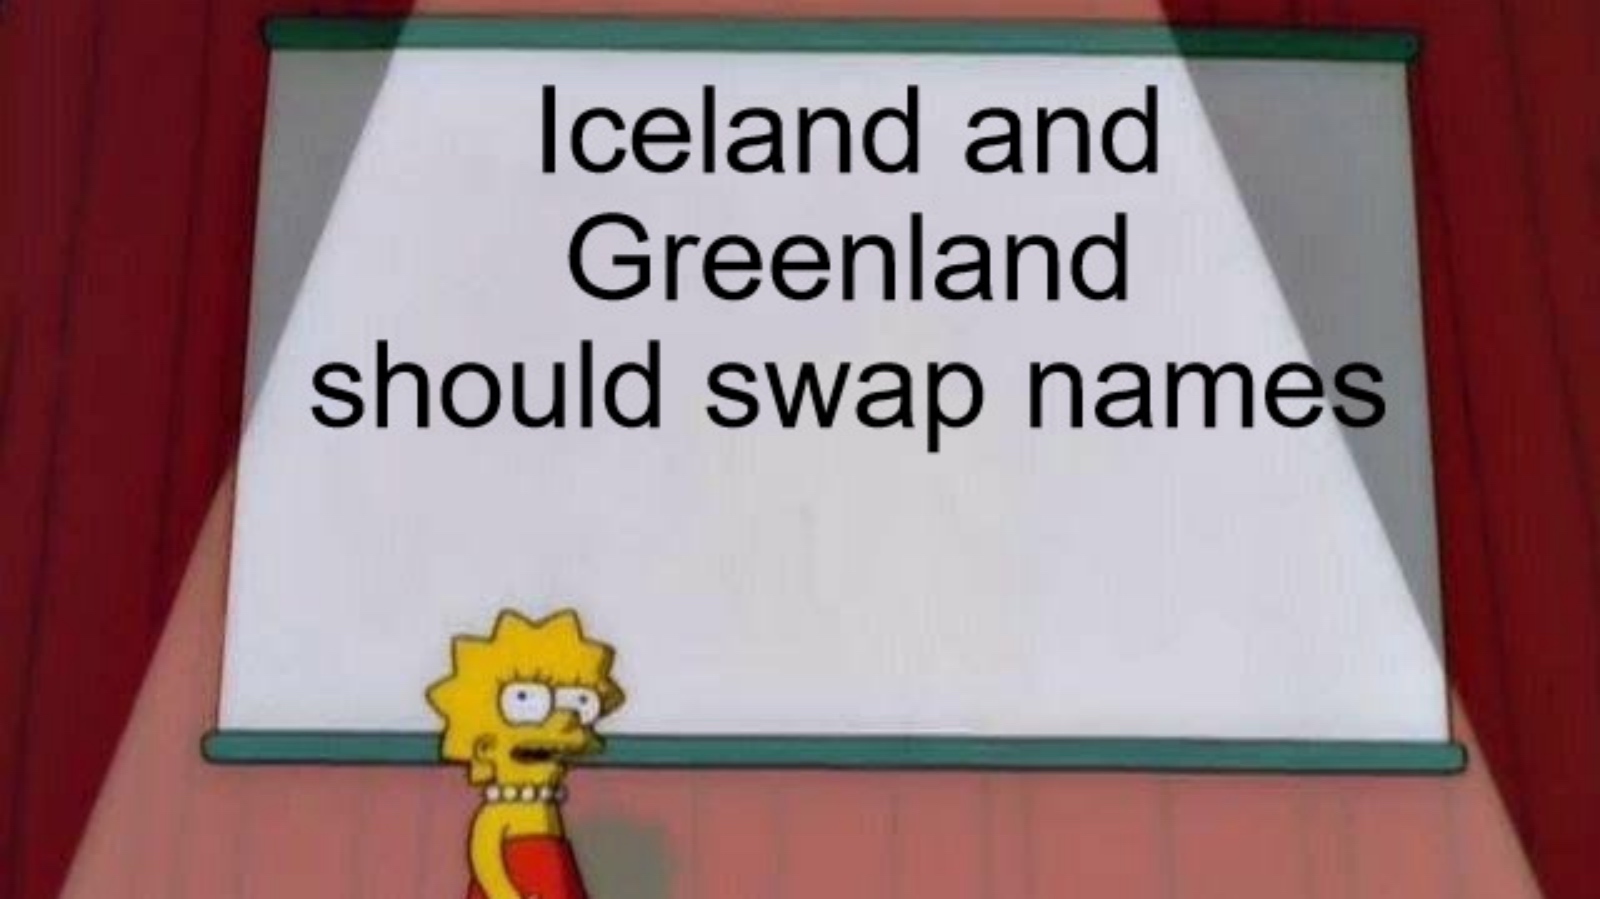 funniest Iceland and Greenland meme